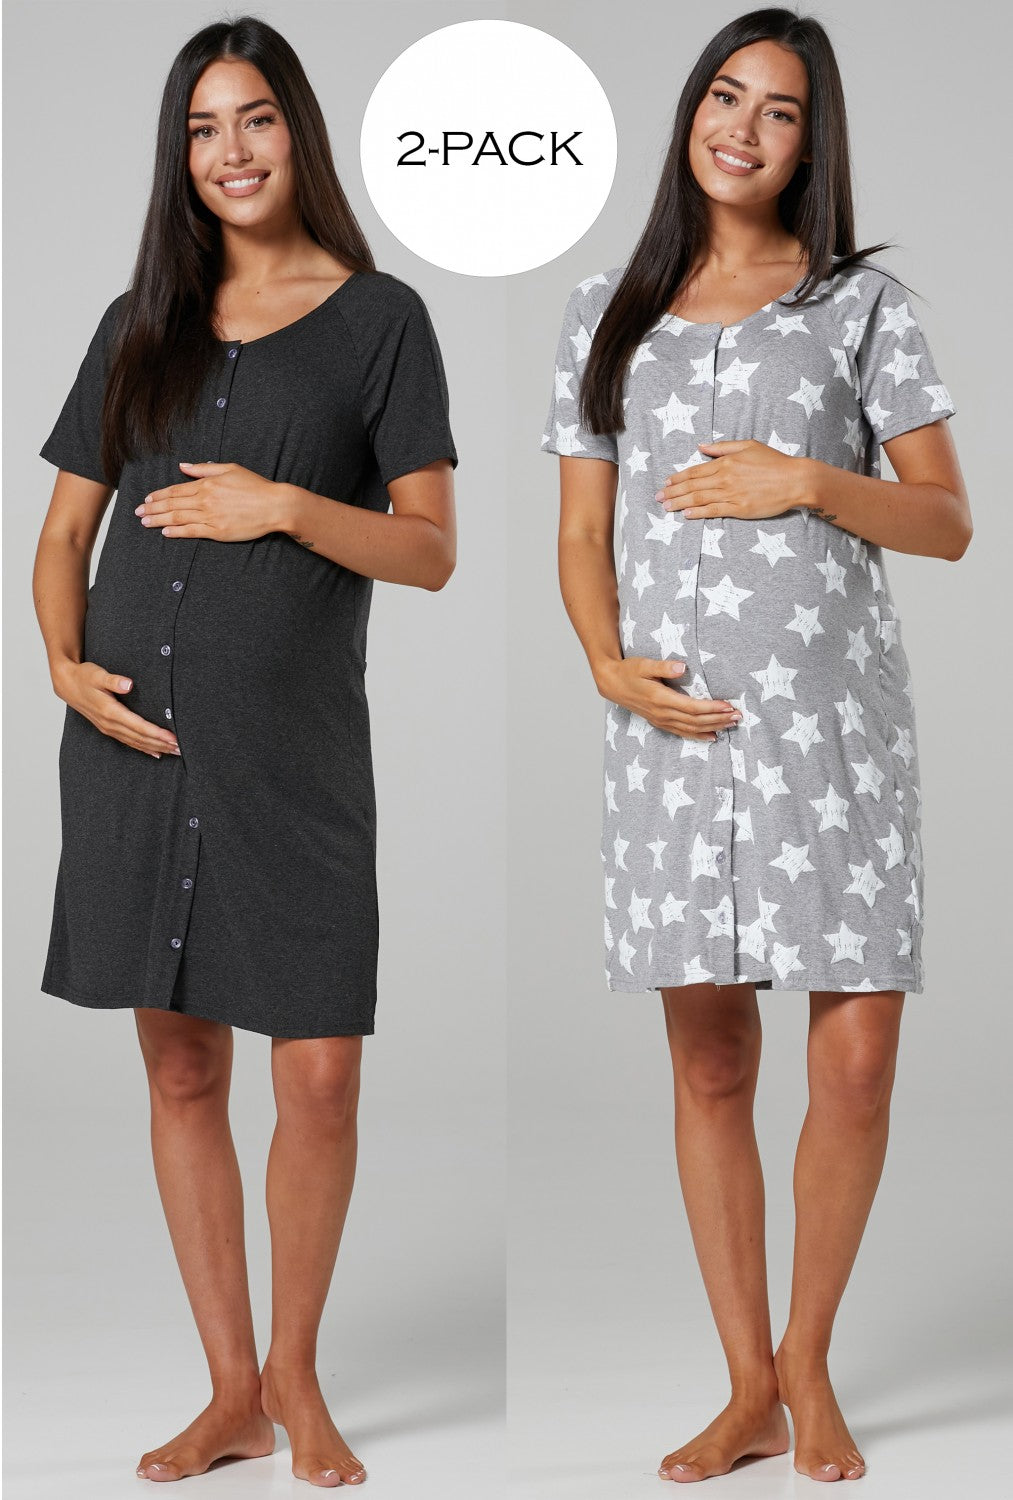 2-Pack Maternity Labour Delivery Gown – Happy Mama